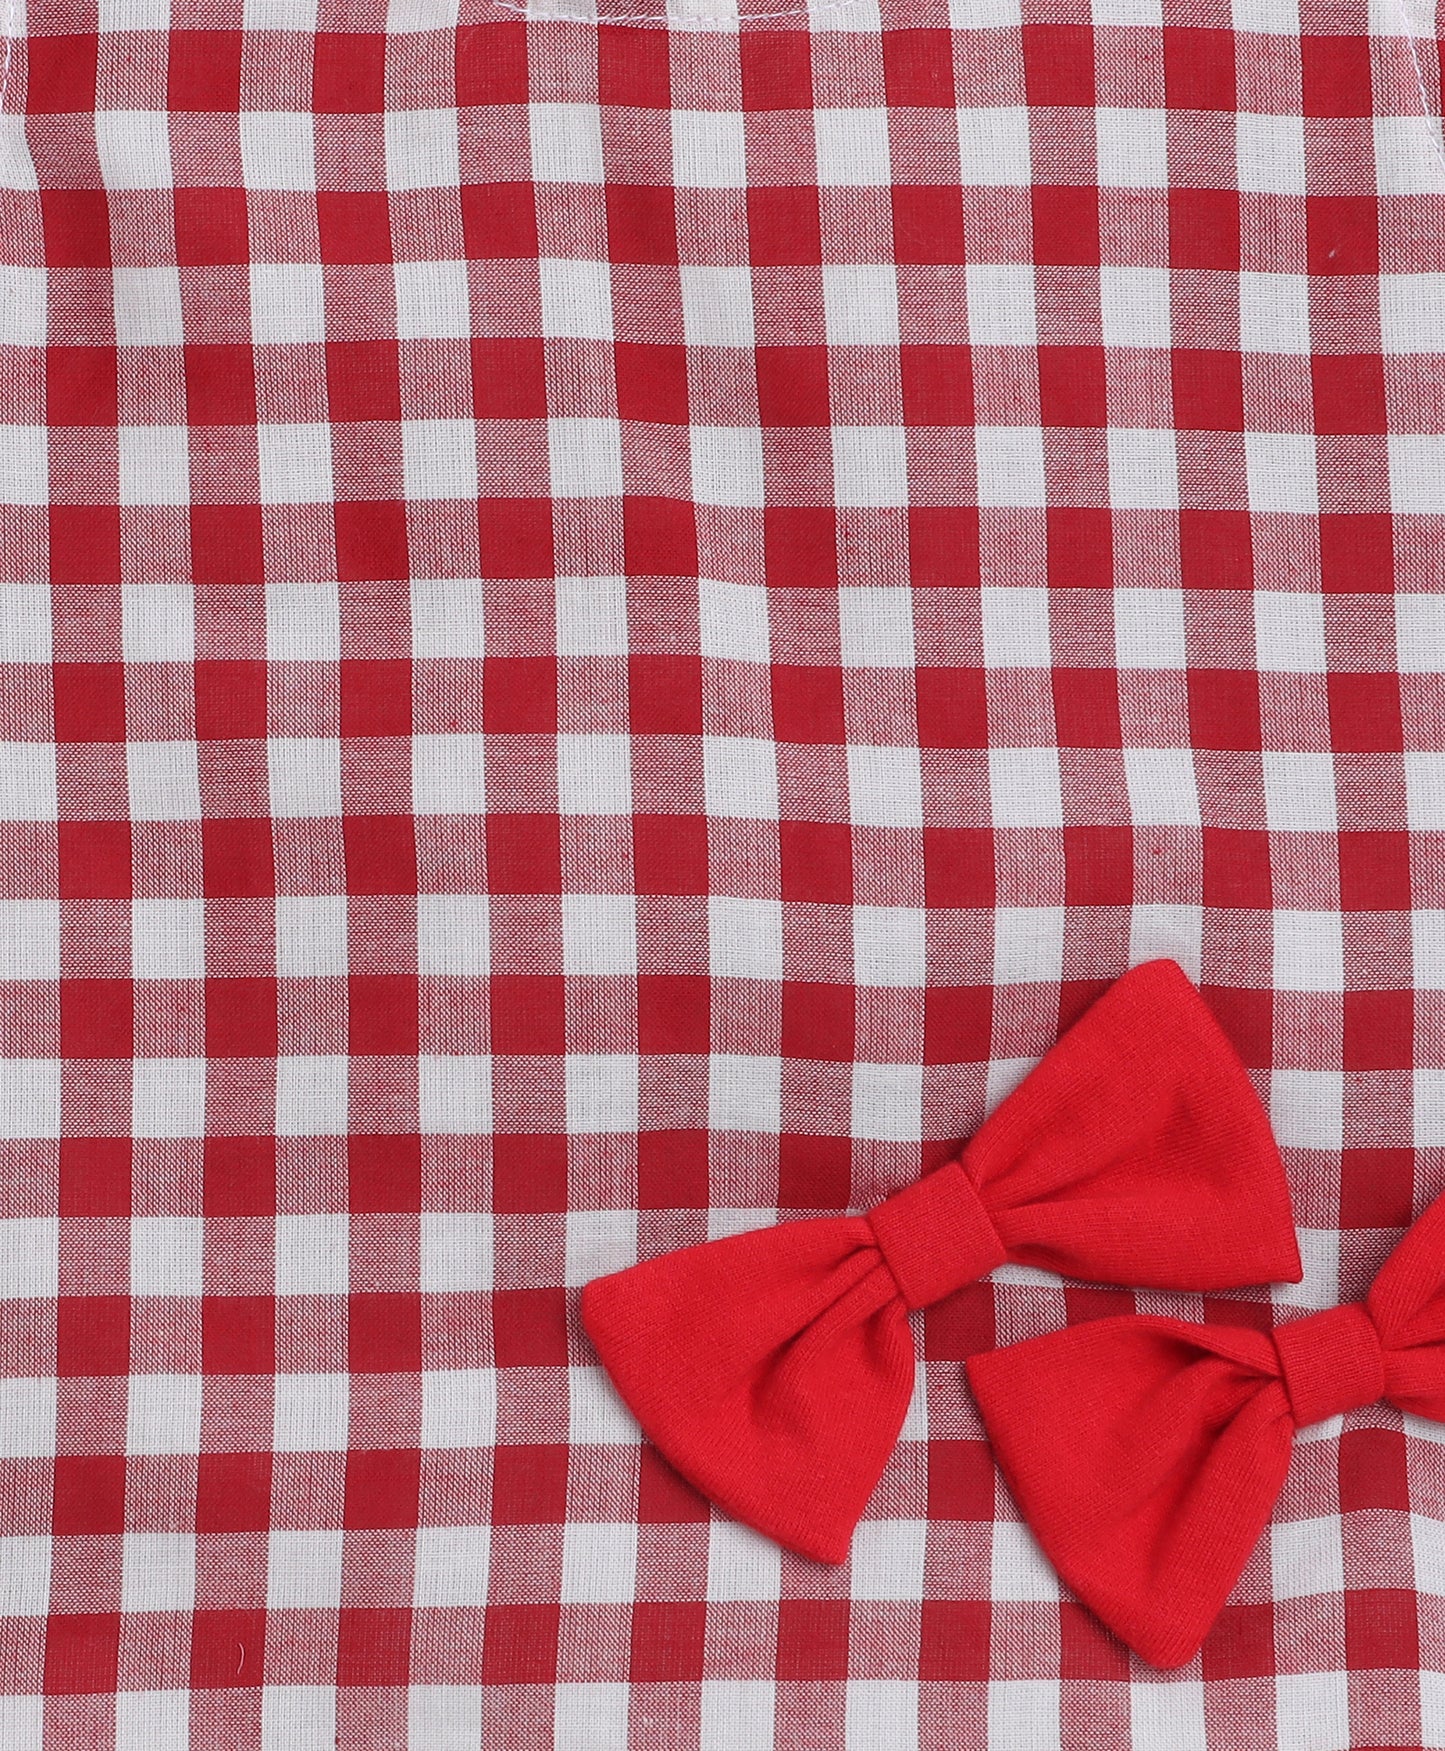 Red and White Checks Coord set with Shorts and top with Cute Bows